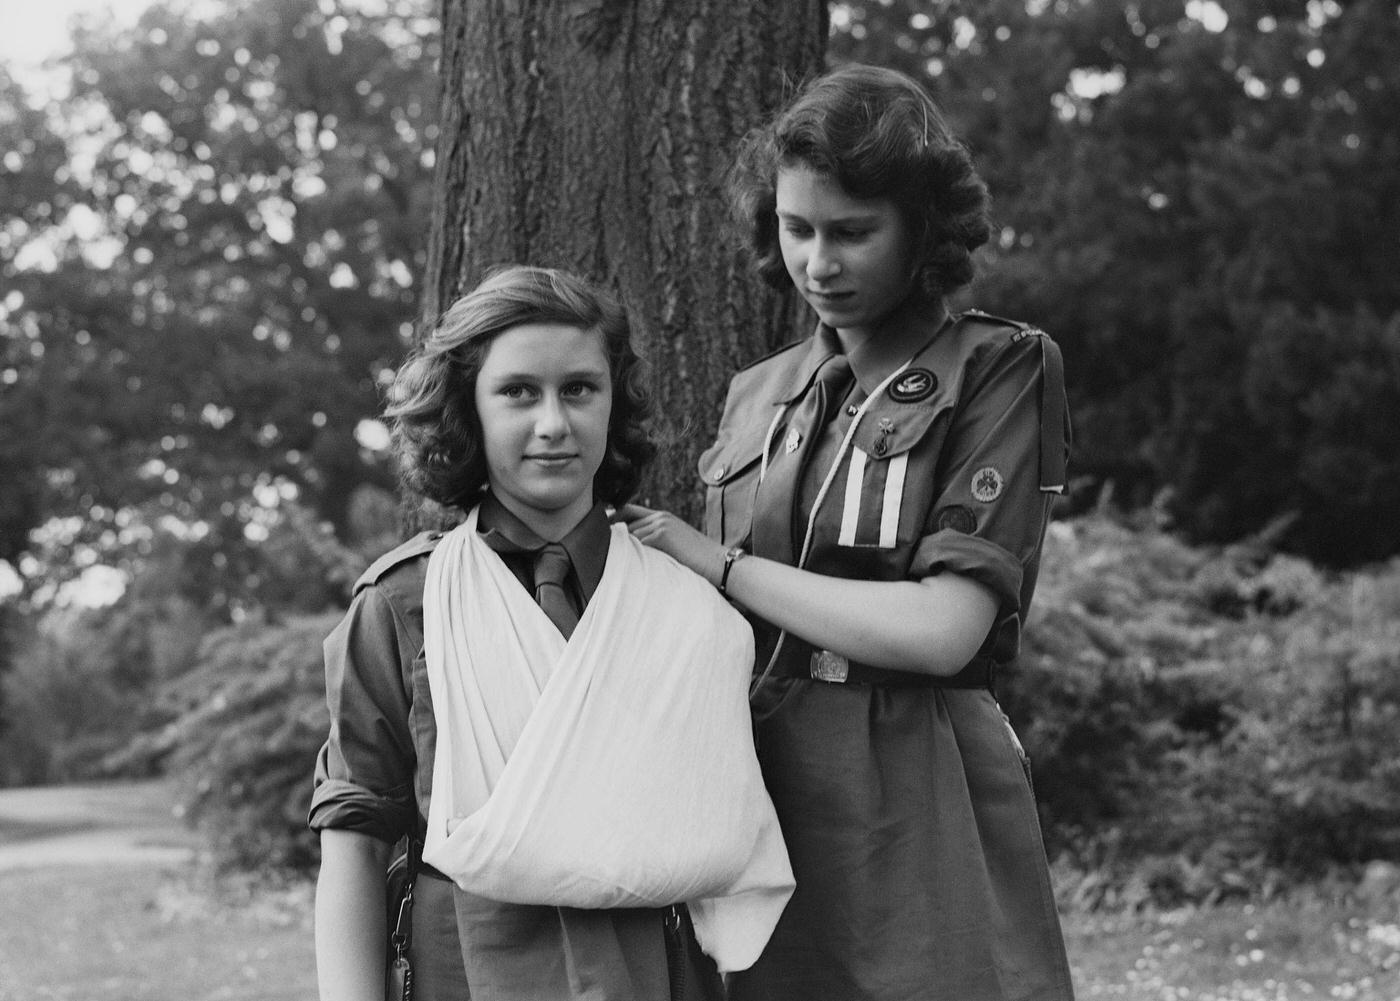 Princess Elizabeth places Princess Margaret's arm in a sling as part of the girl guides in Frogmore, Windsor, England on April 11, 1942.